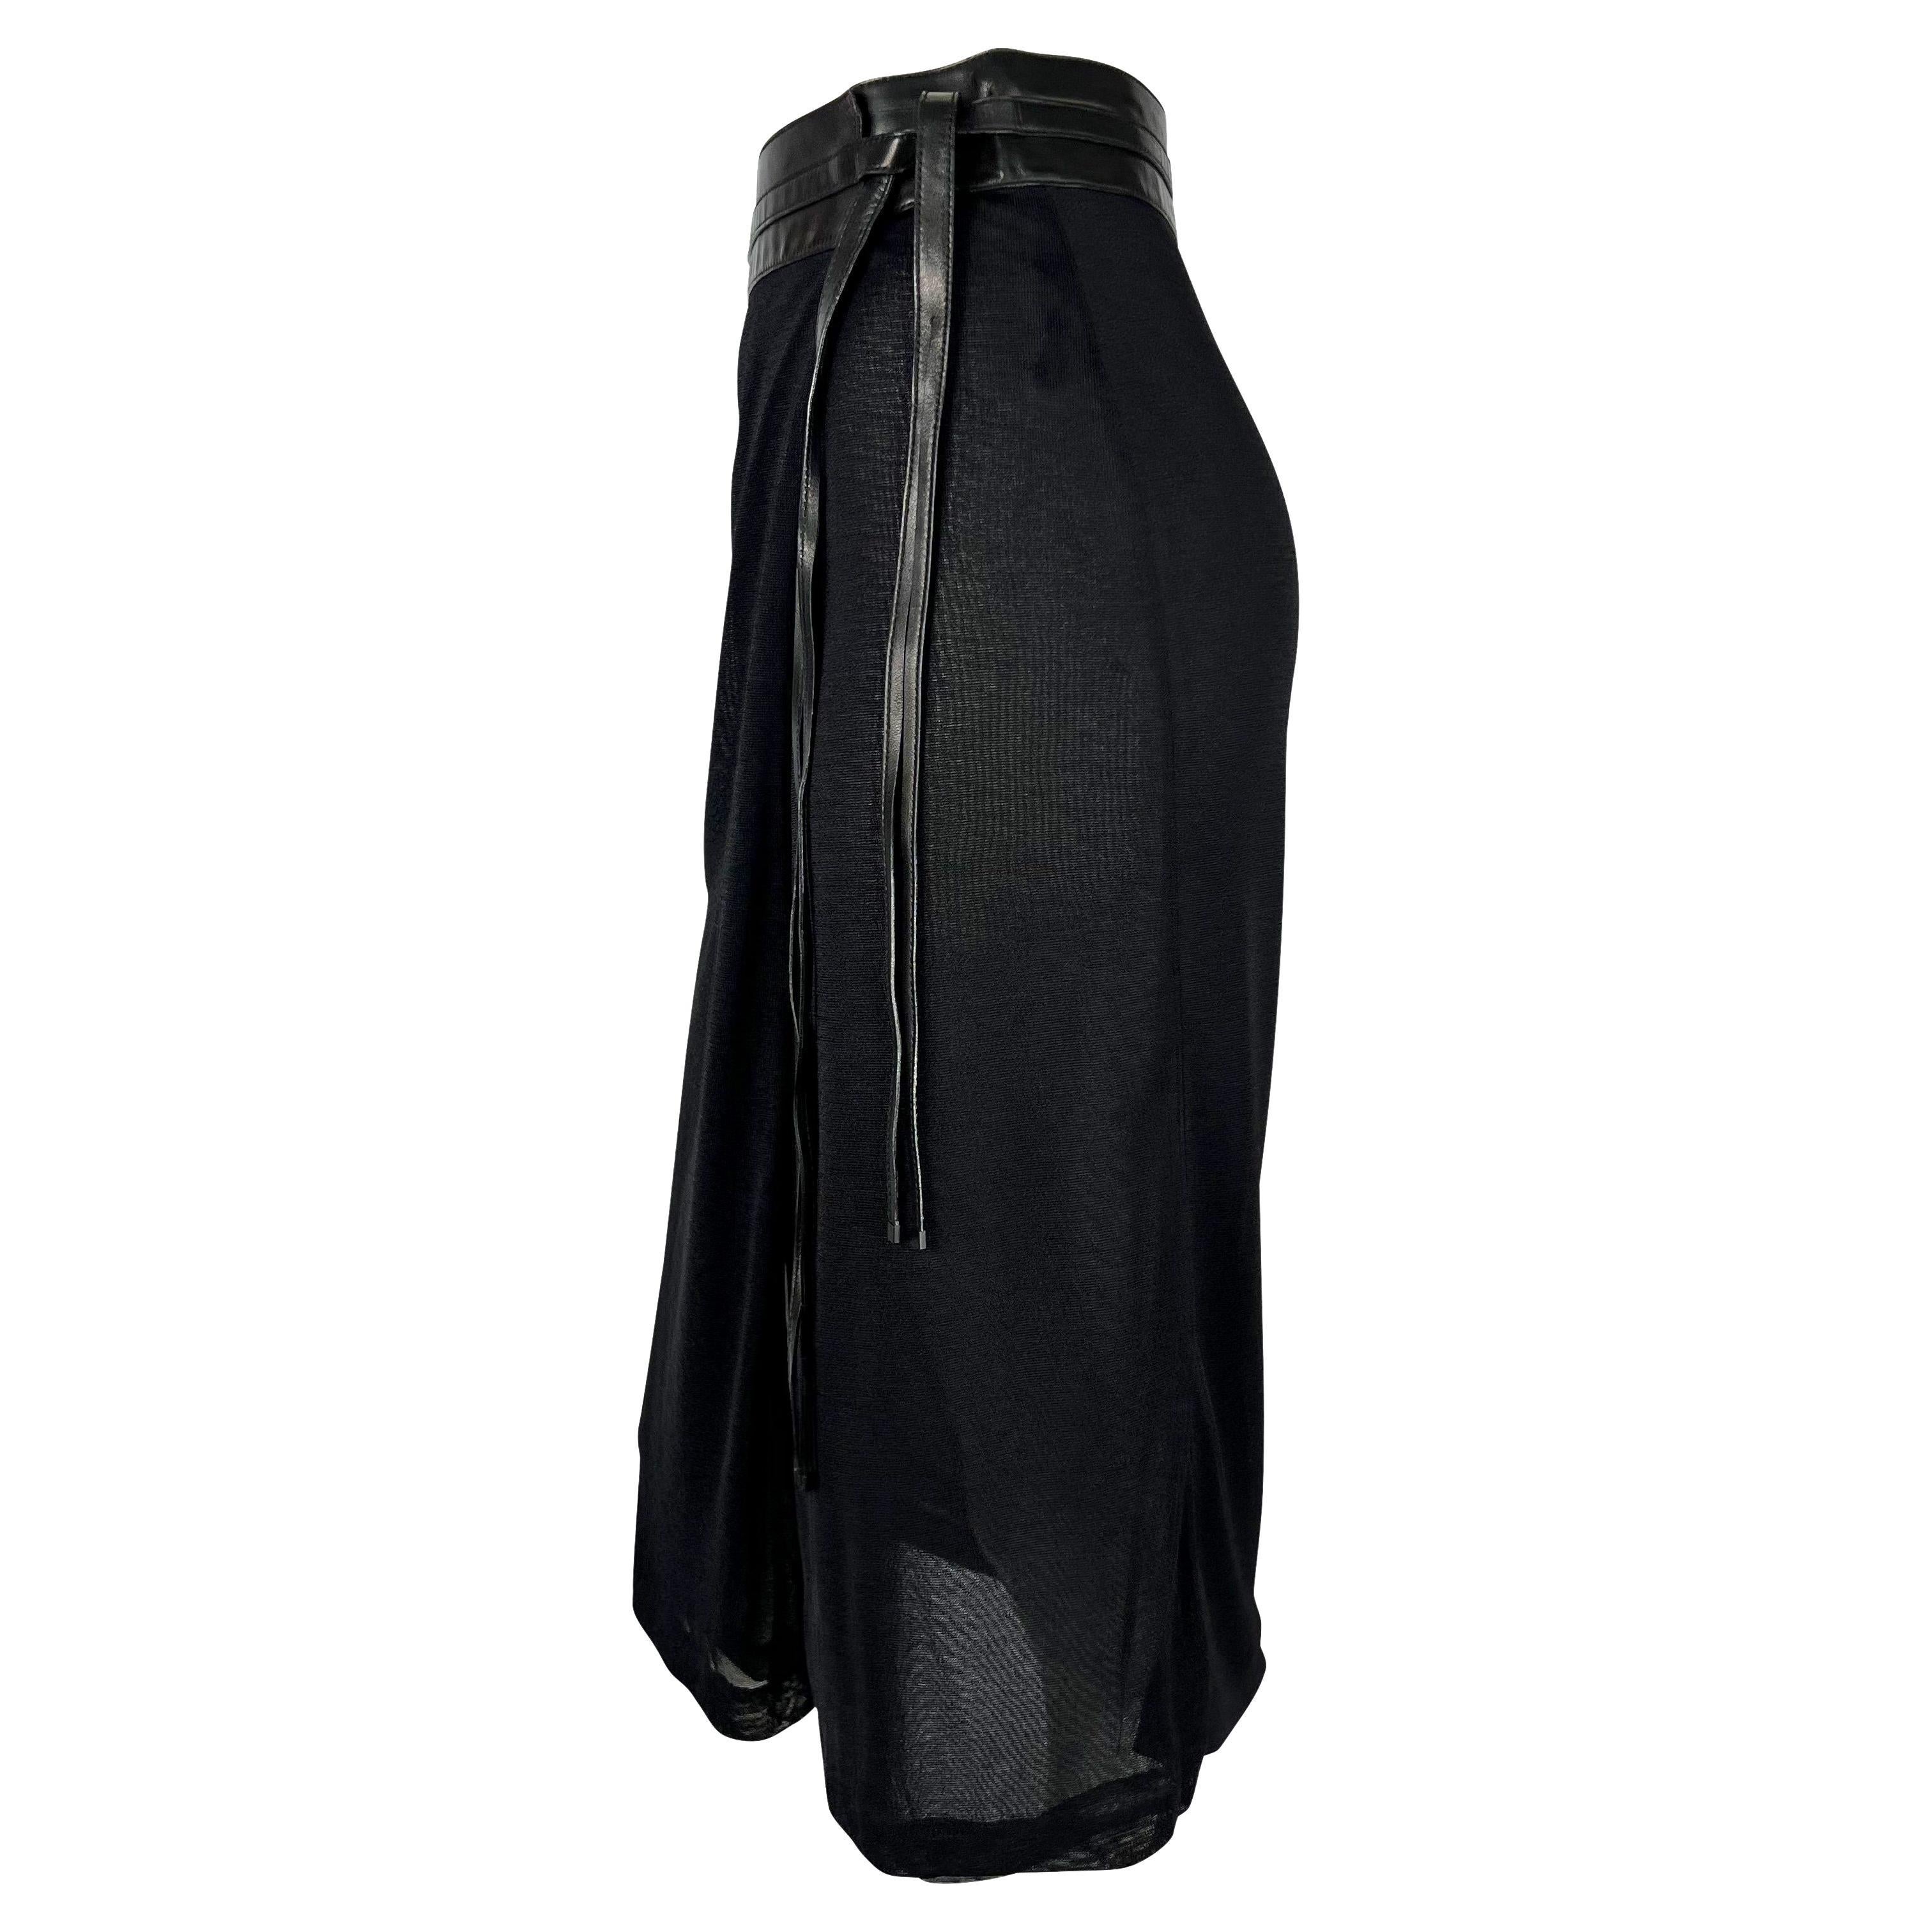 S/S 2001 Gucci by Tom Ford Sheer Black Leather Belted Wrap Skirt In Good Condition For Sale In West Hollywood, CA